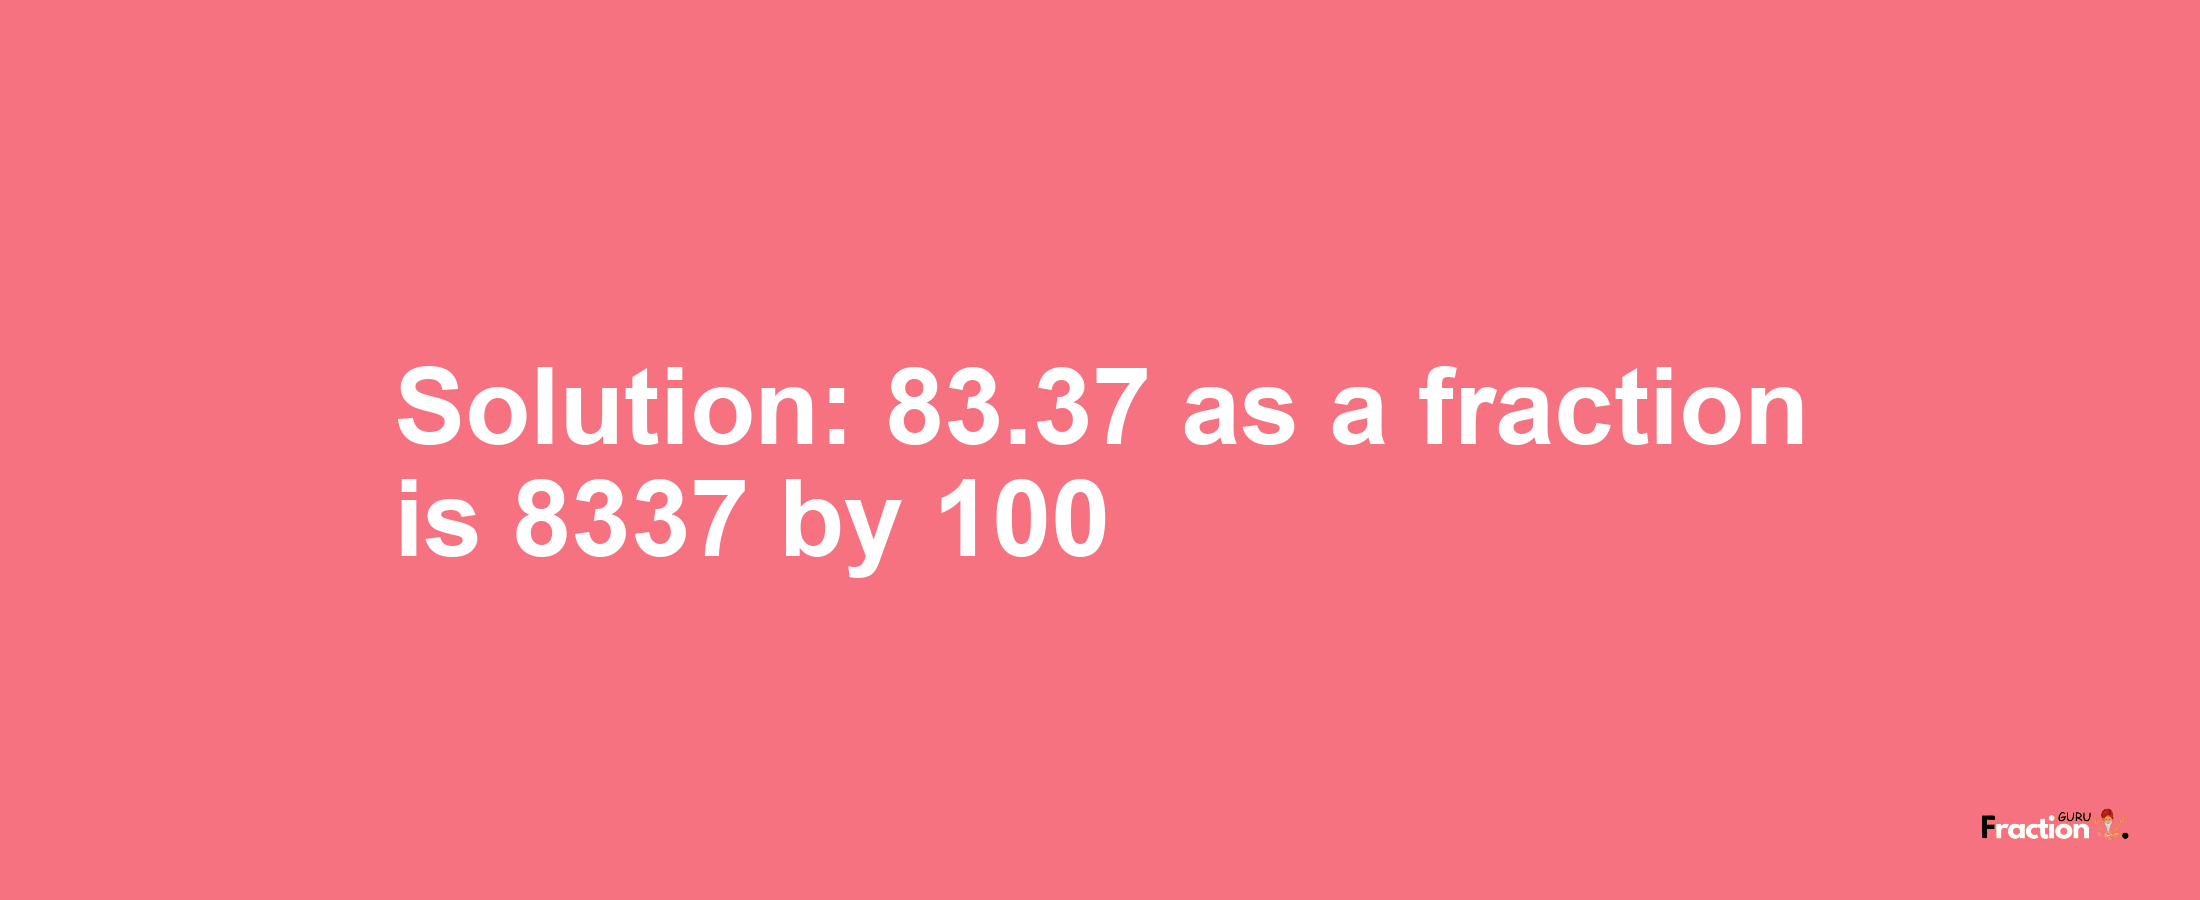 Solution:83.37 as a fraction is 8337/100